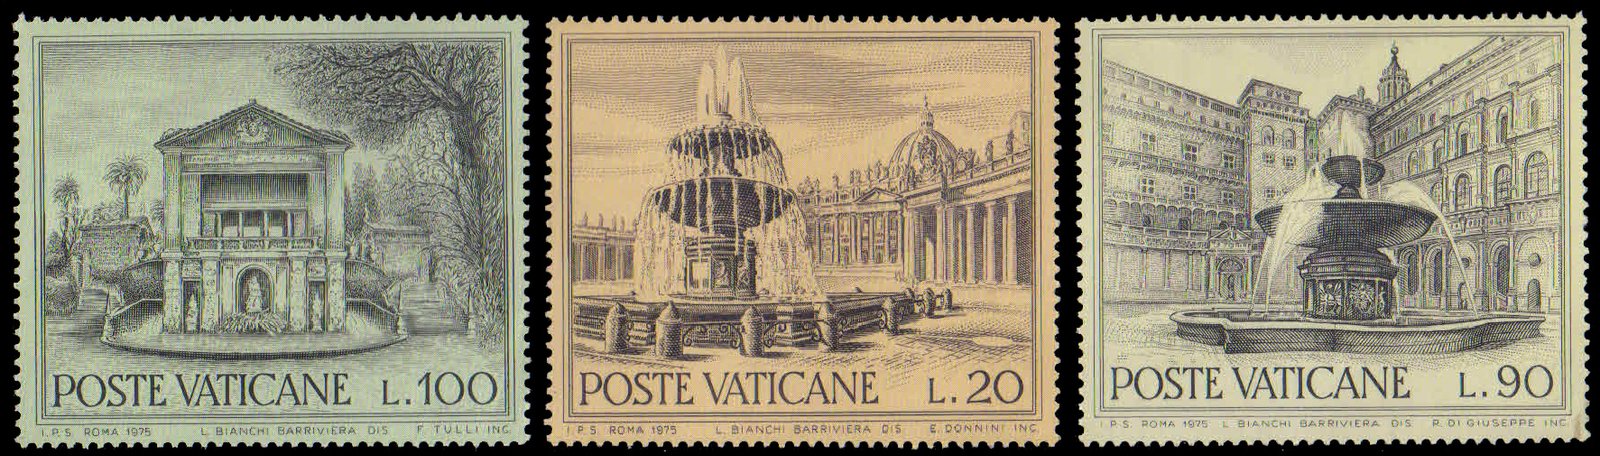 VATICAN CITY 1975-European Architectural Heritage Year, Fountains, 3 Different Stamps, MNH, S.G. 633, 636, 637